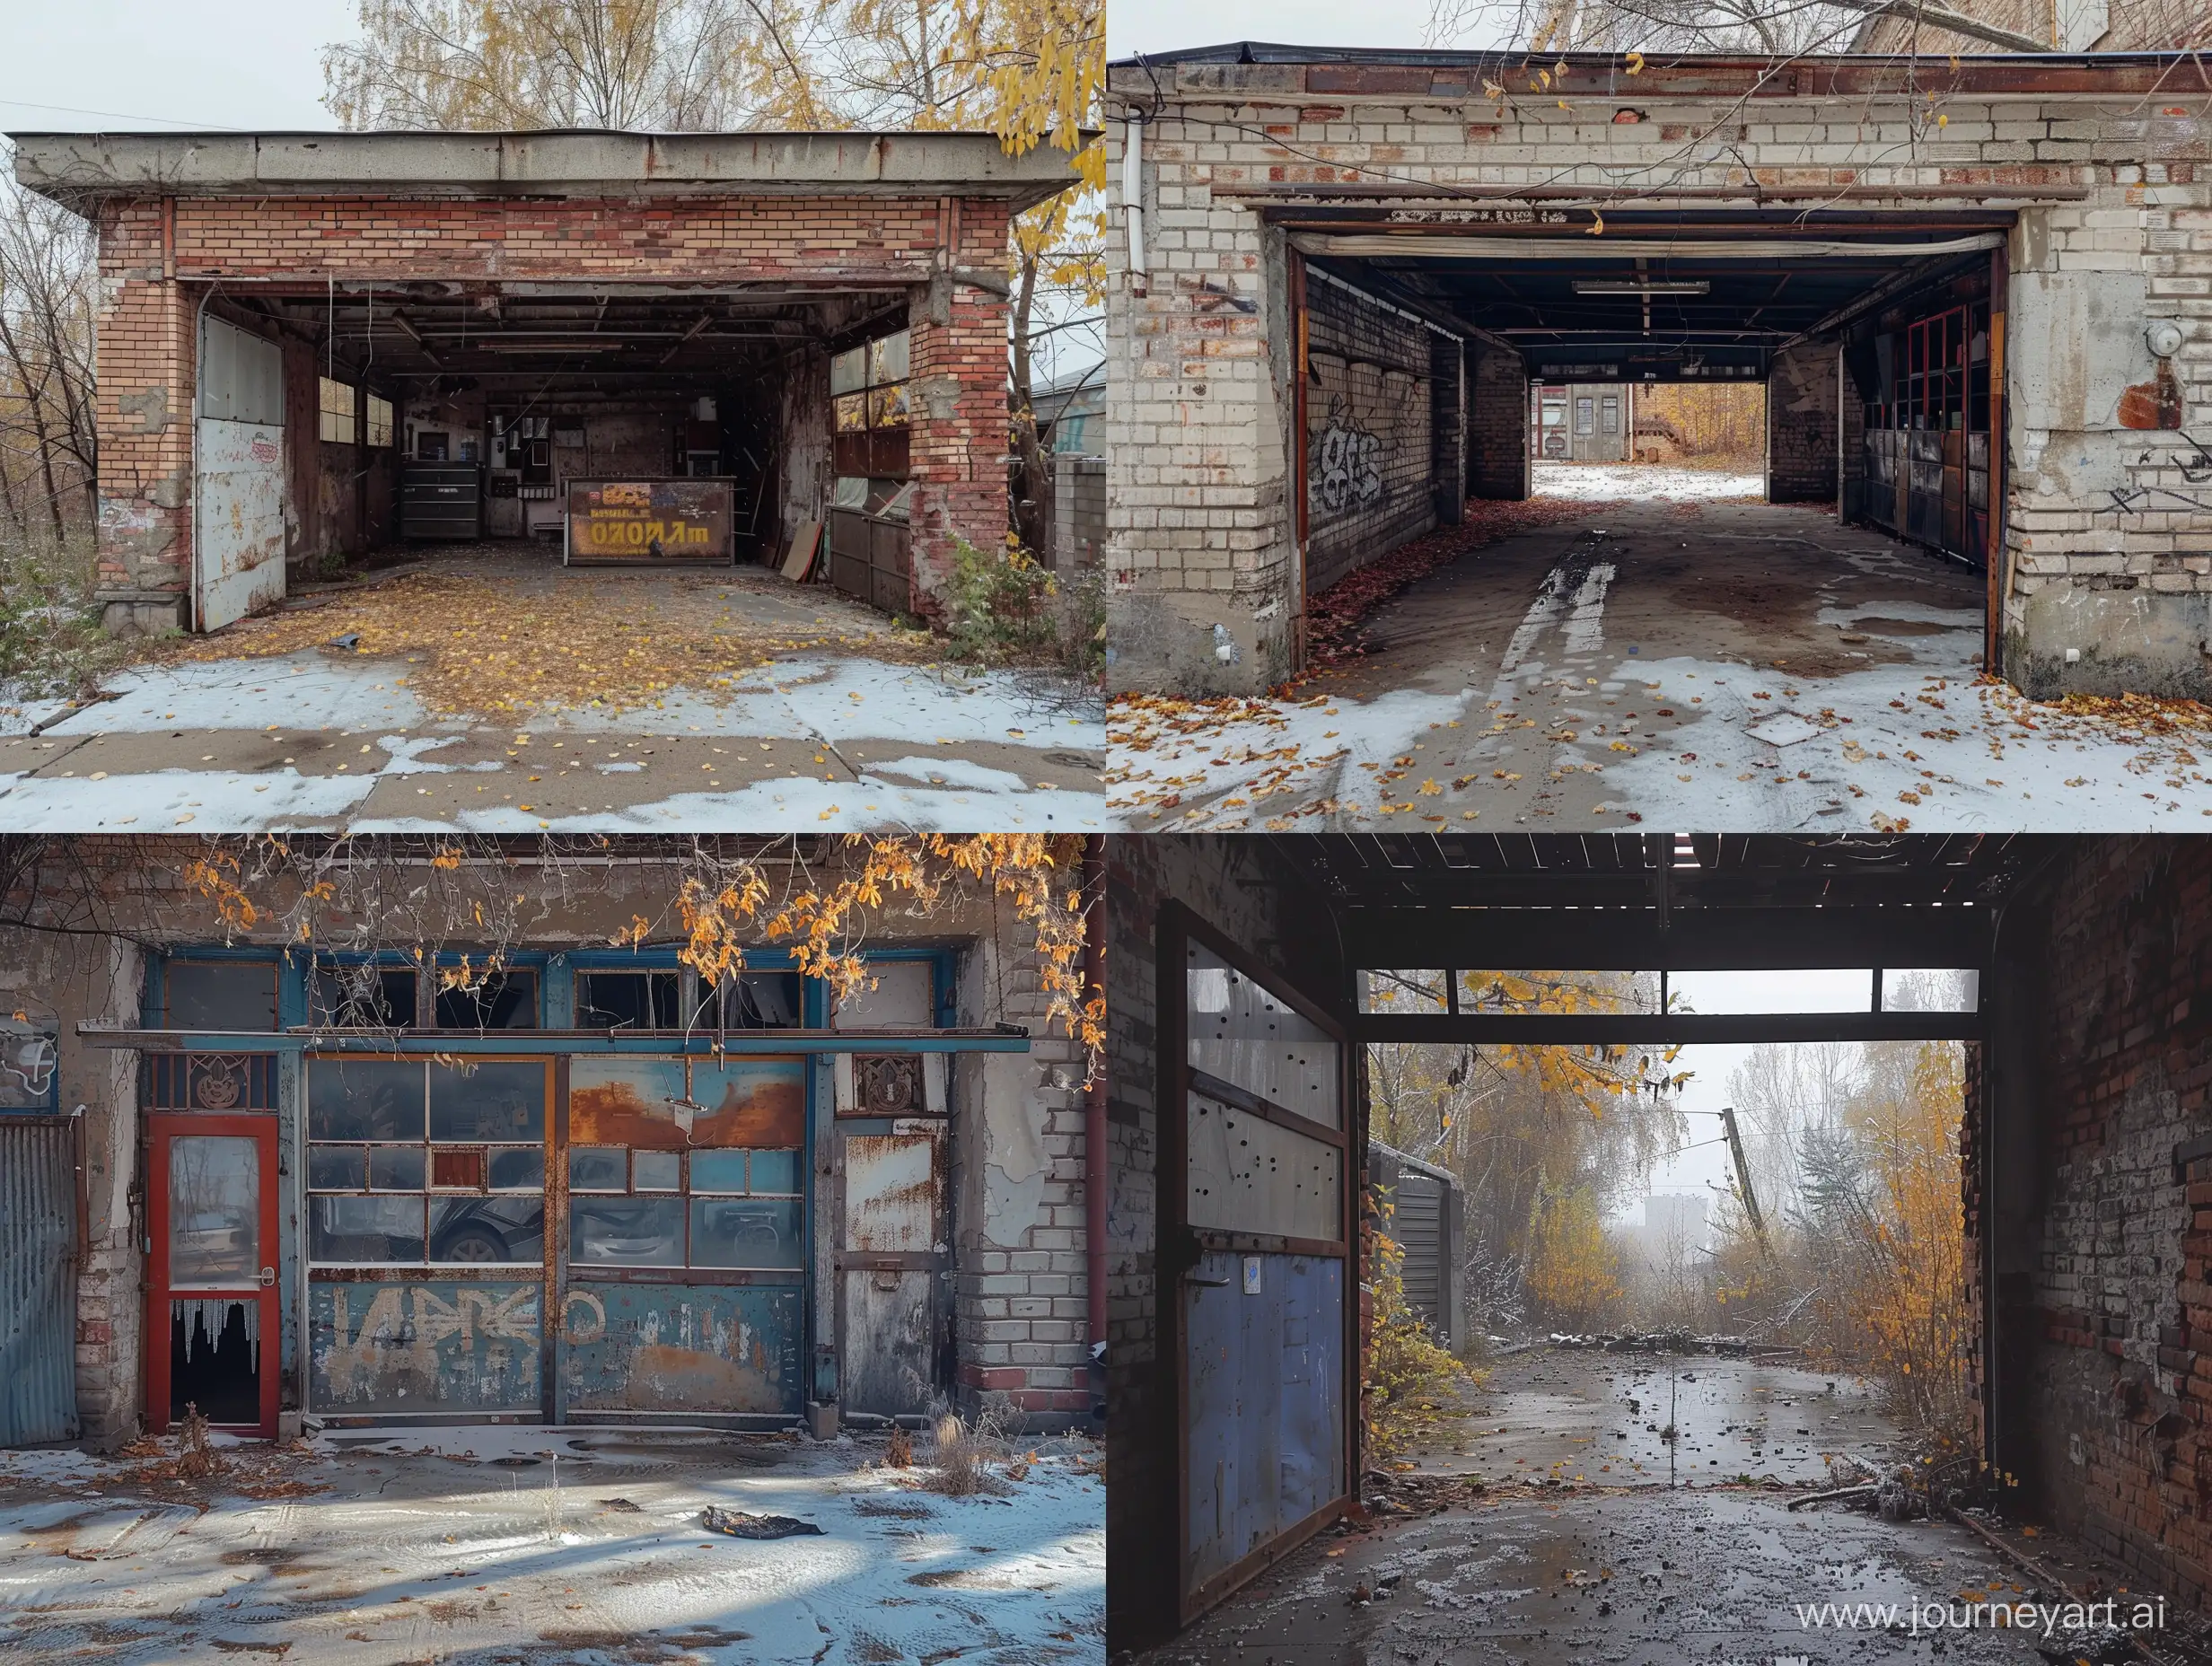 Desolate-Cooperative-Abandoned-Garage-in-Late-Autumn-Russian-City-Setting